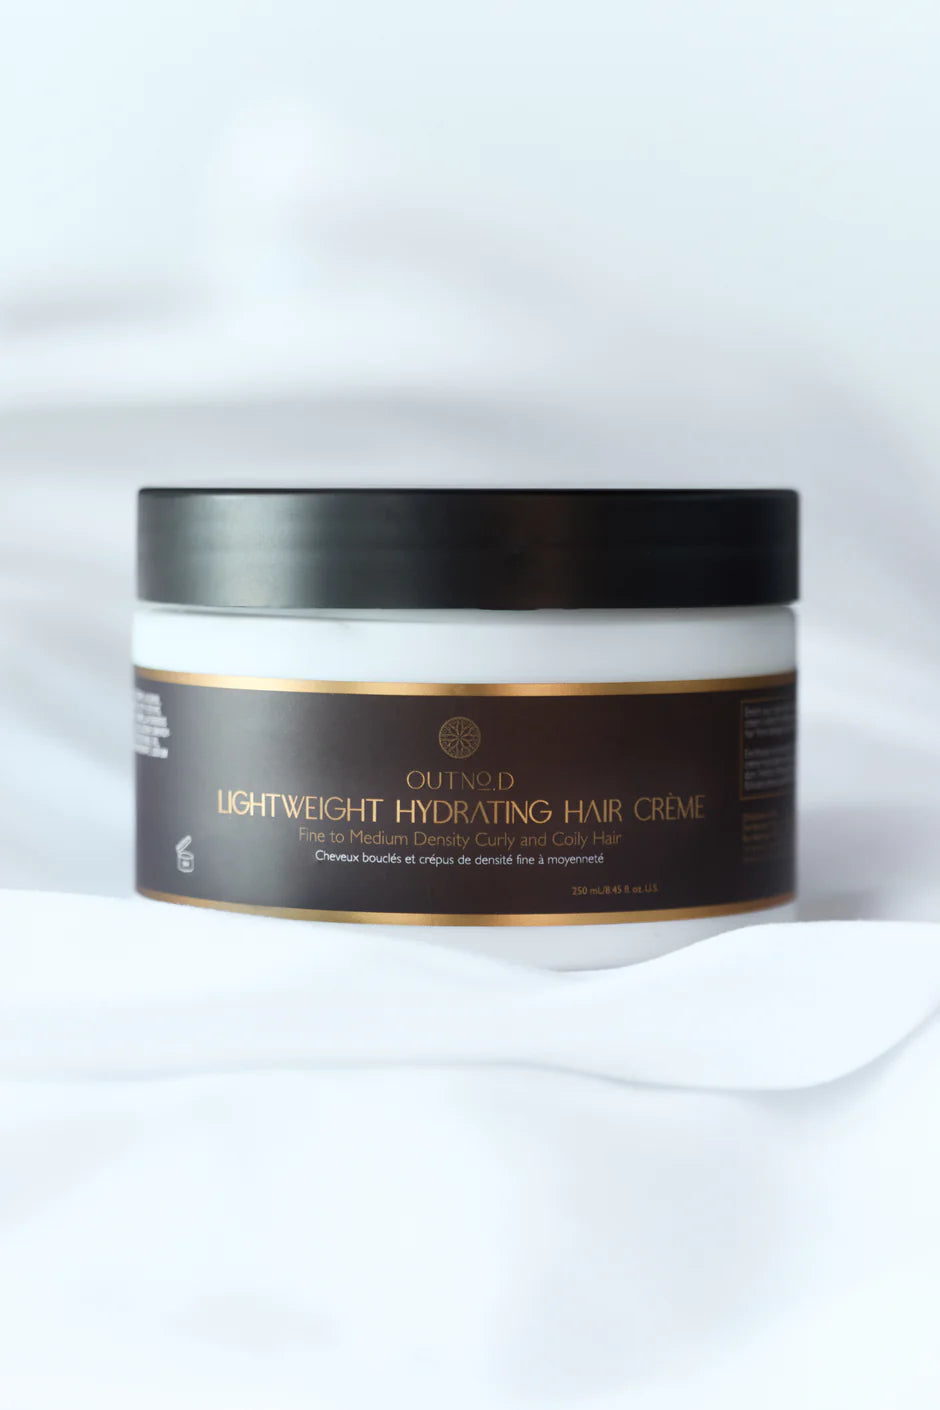 OutNo.d Lightweight Hydrating Hair Crème